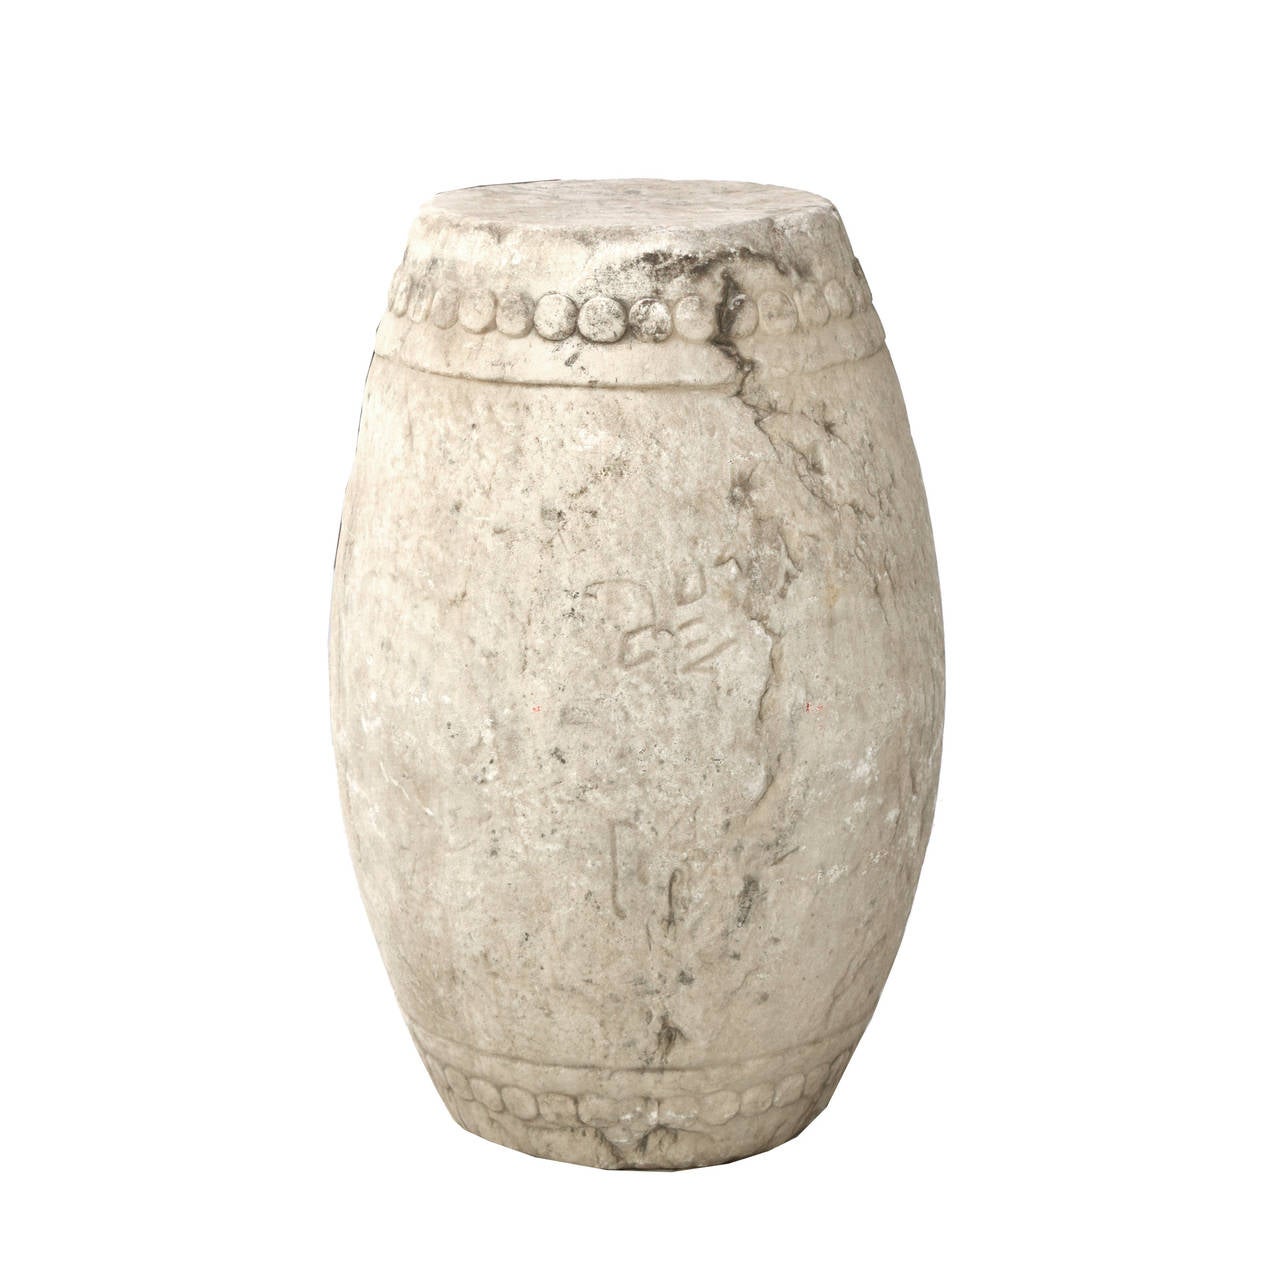 Pair of northern Chinese Limestone Drum shaped column bases.   Hand carved, these graceful Ming form objects are conservatively dated to the early 19th century and are engraved with Chinese characters on one side.